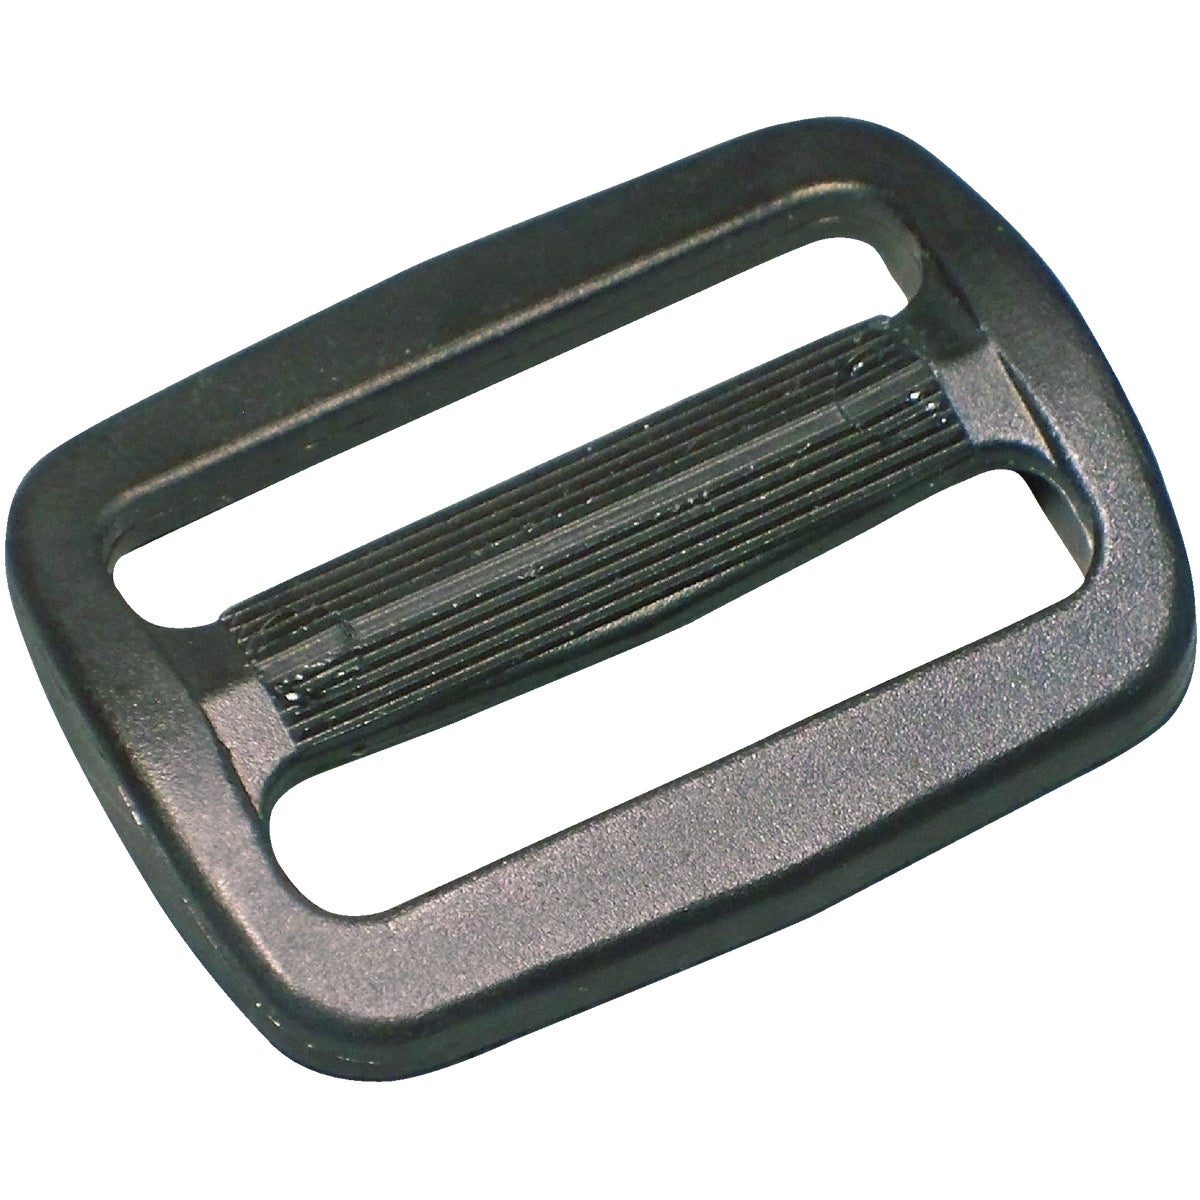 Item 582751, For bulk strap webbing to attach buckles, cams, and hooks.